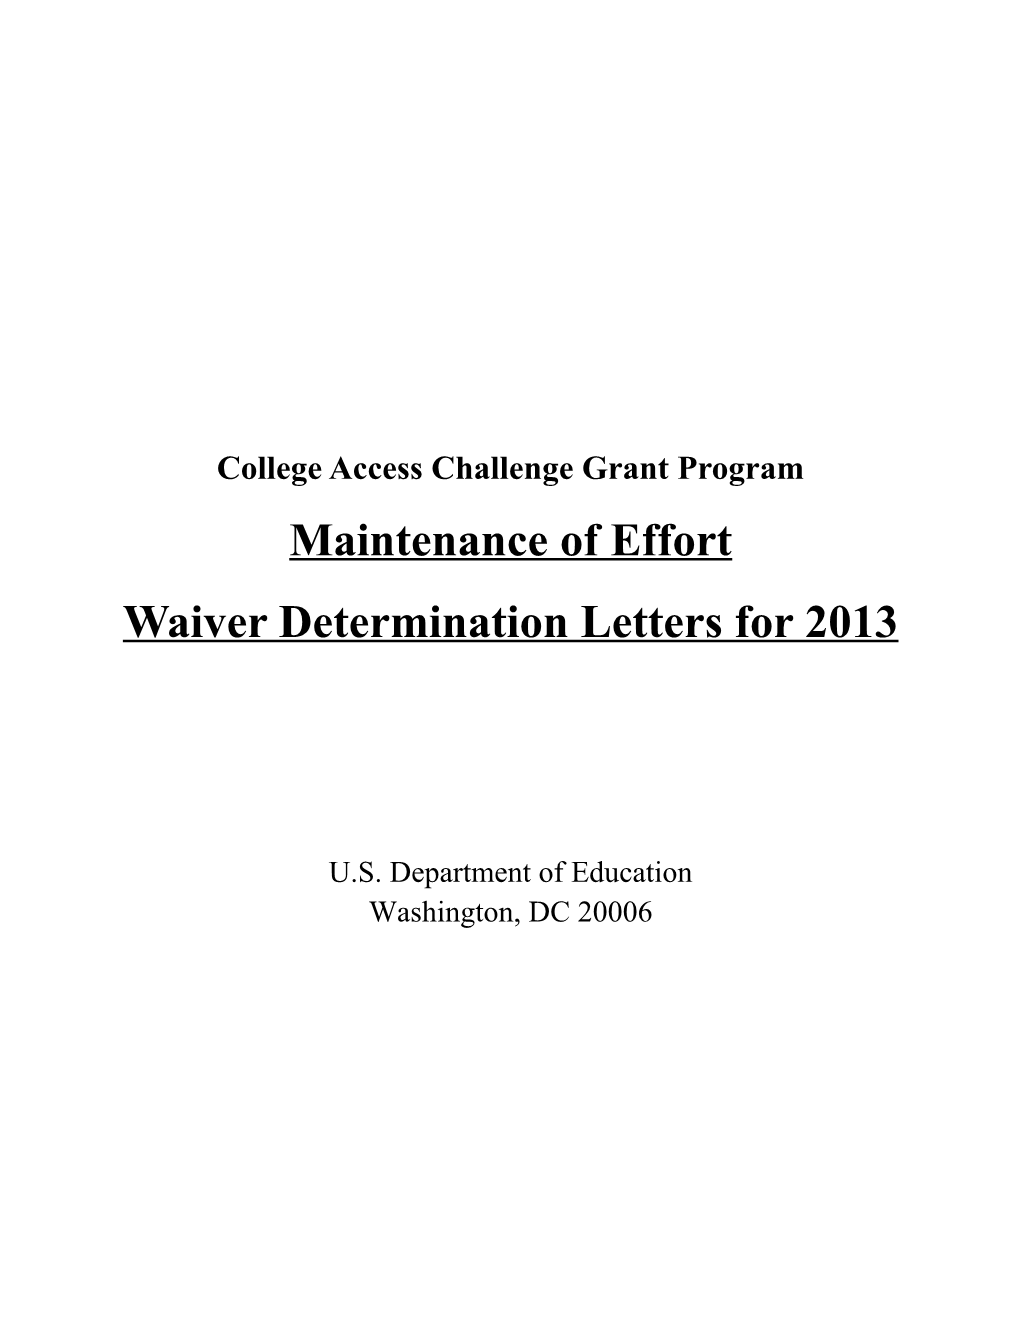 Maintenance of Effort Waiver of Determination Letters for 2013 Under the College Access